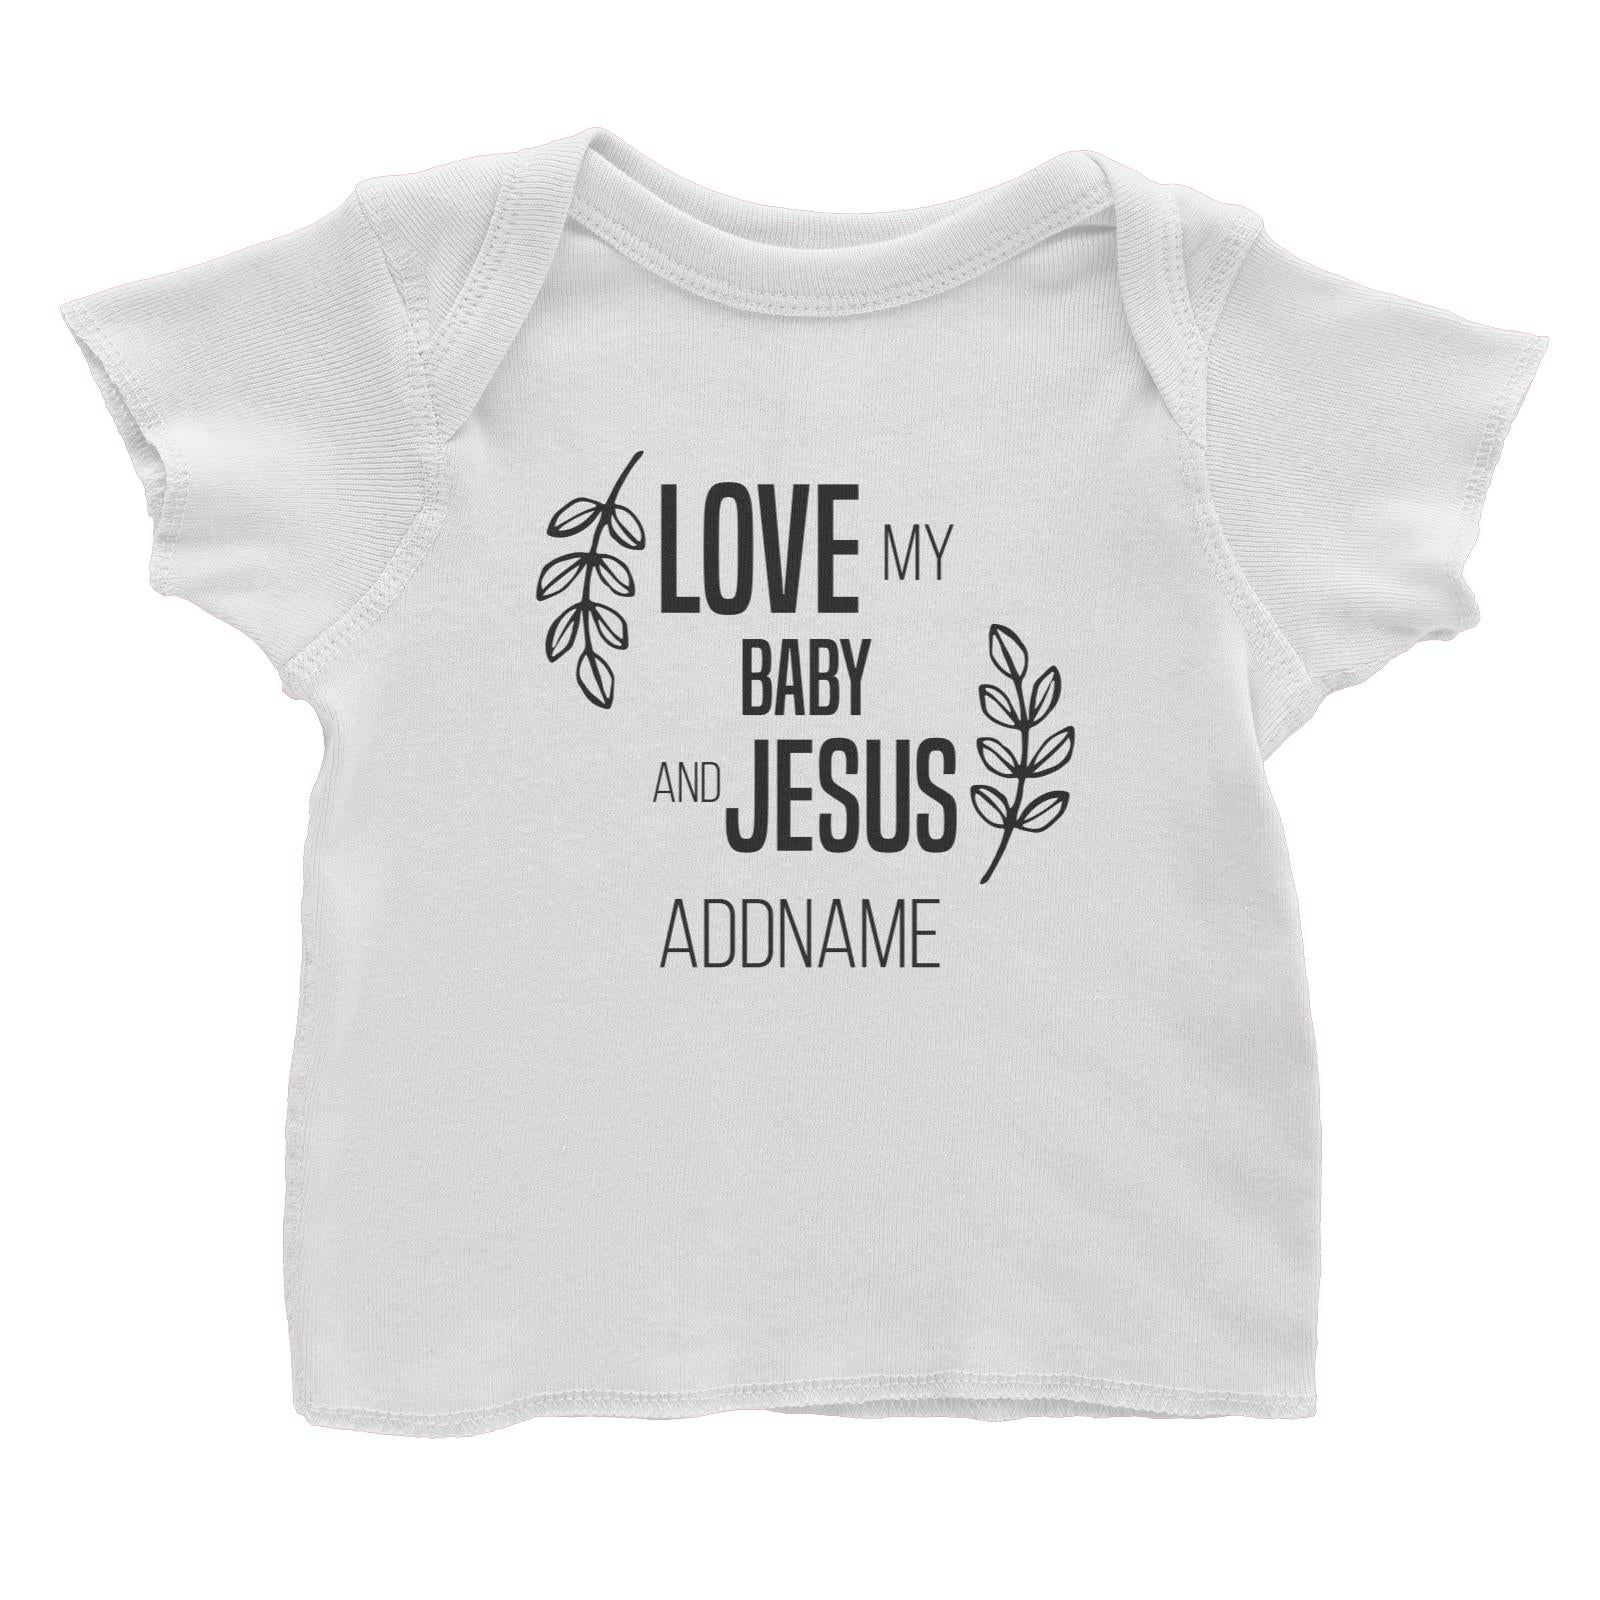 Christian Series Love My Baby And Jesus Addname Baby T-Shirt